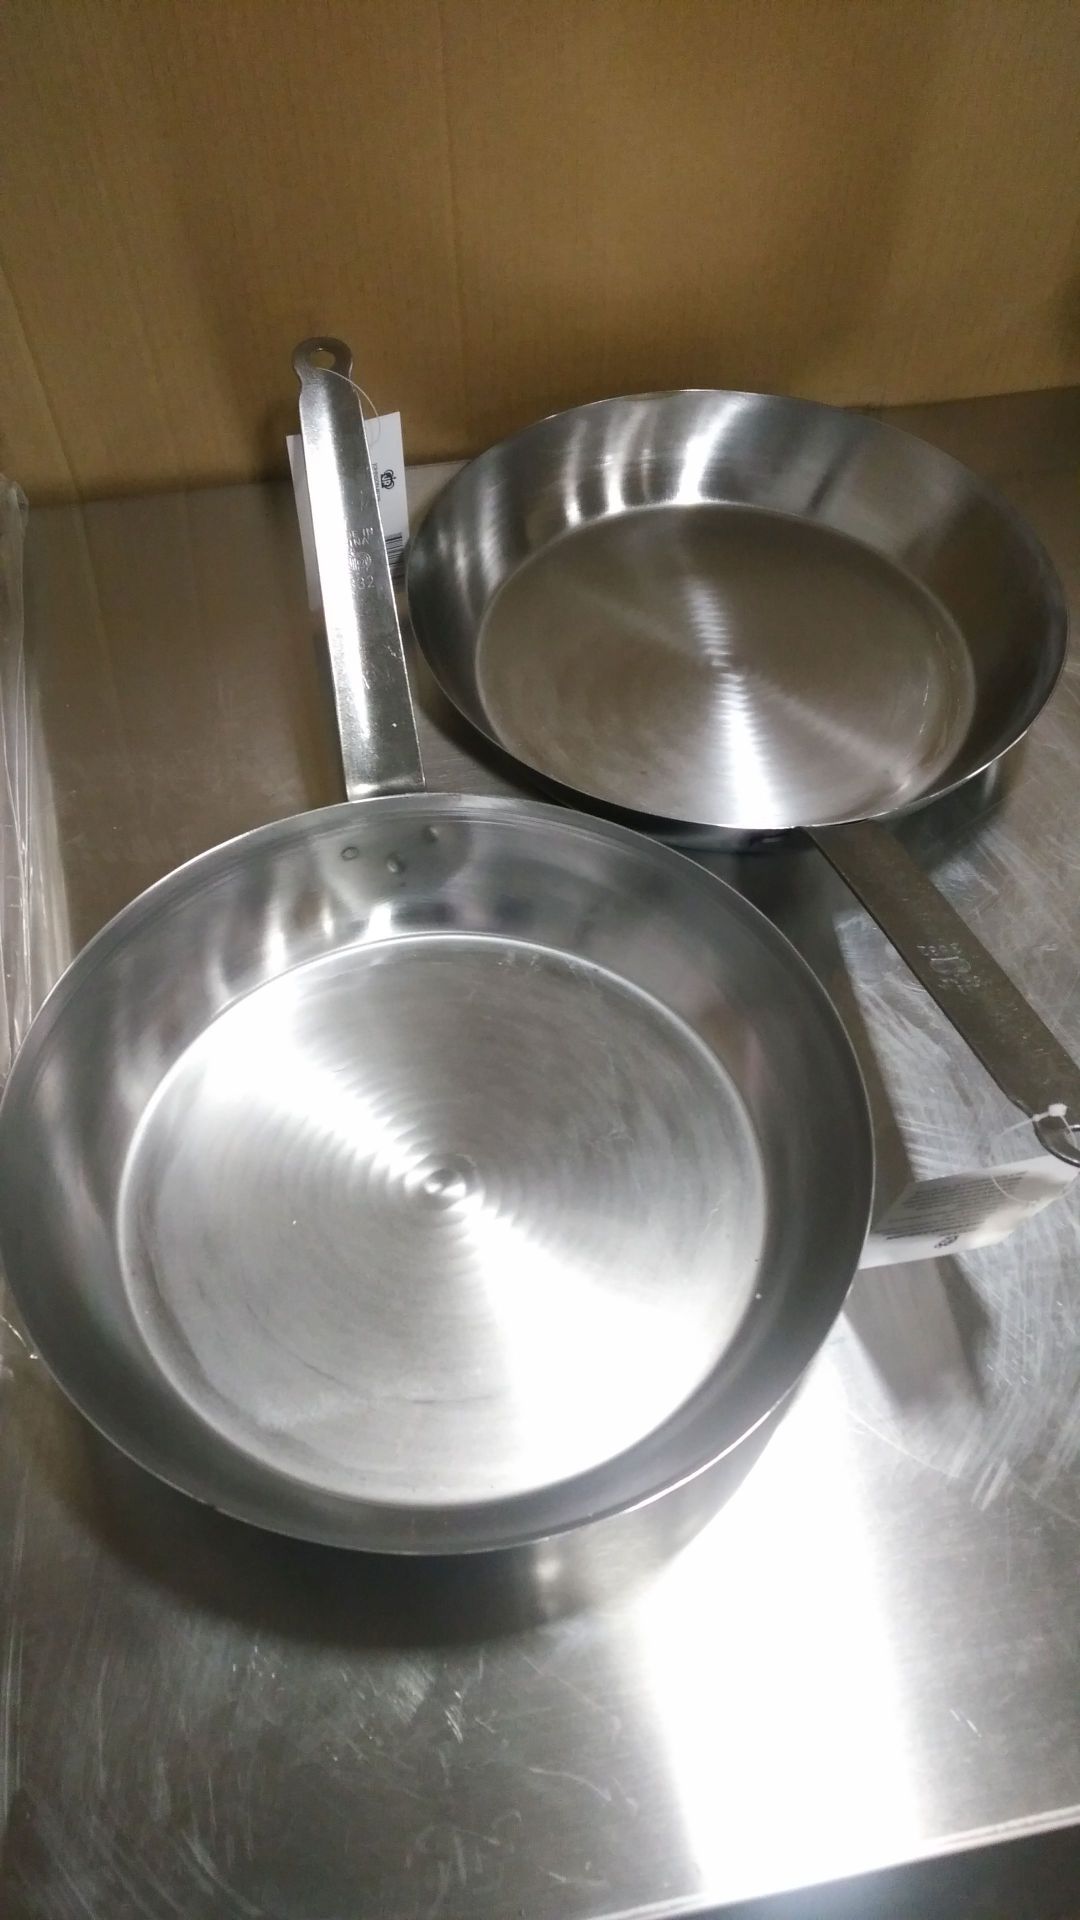 12.5" Carbon Steel Fry Pans - Lot of 2 - Image 2 of 2